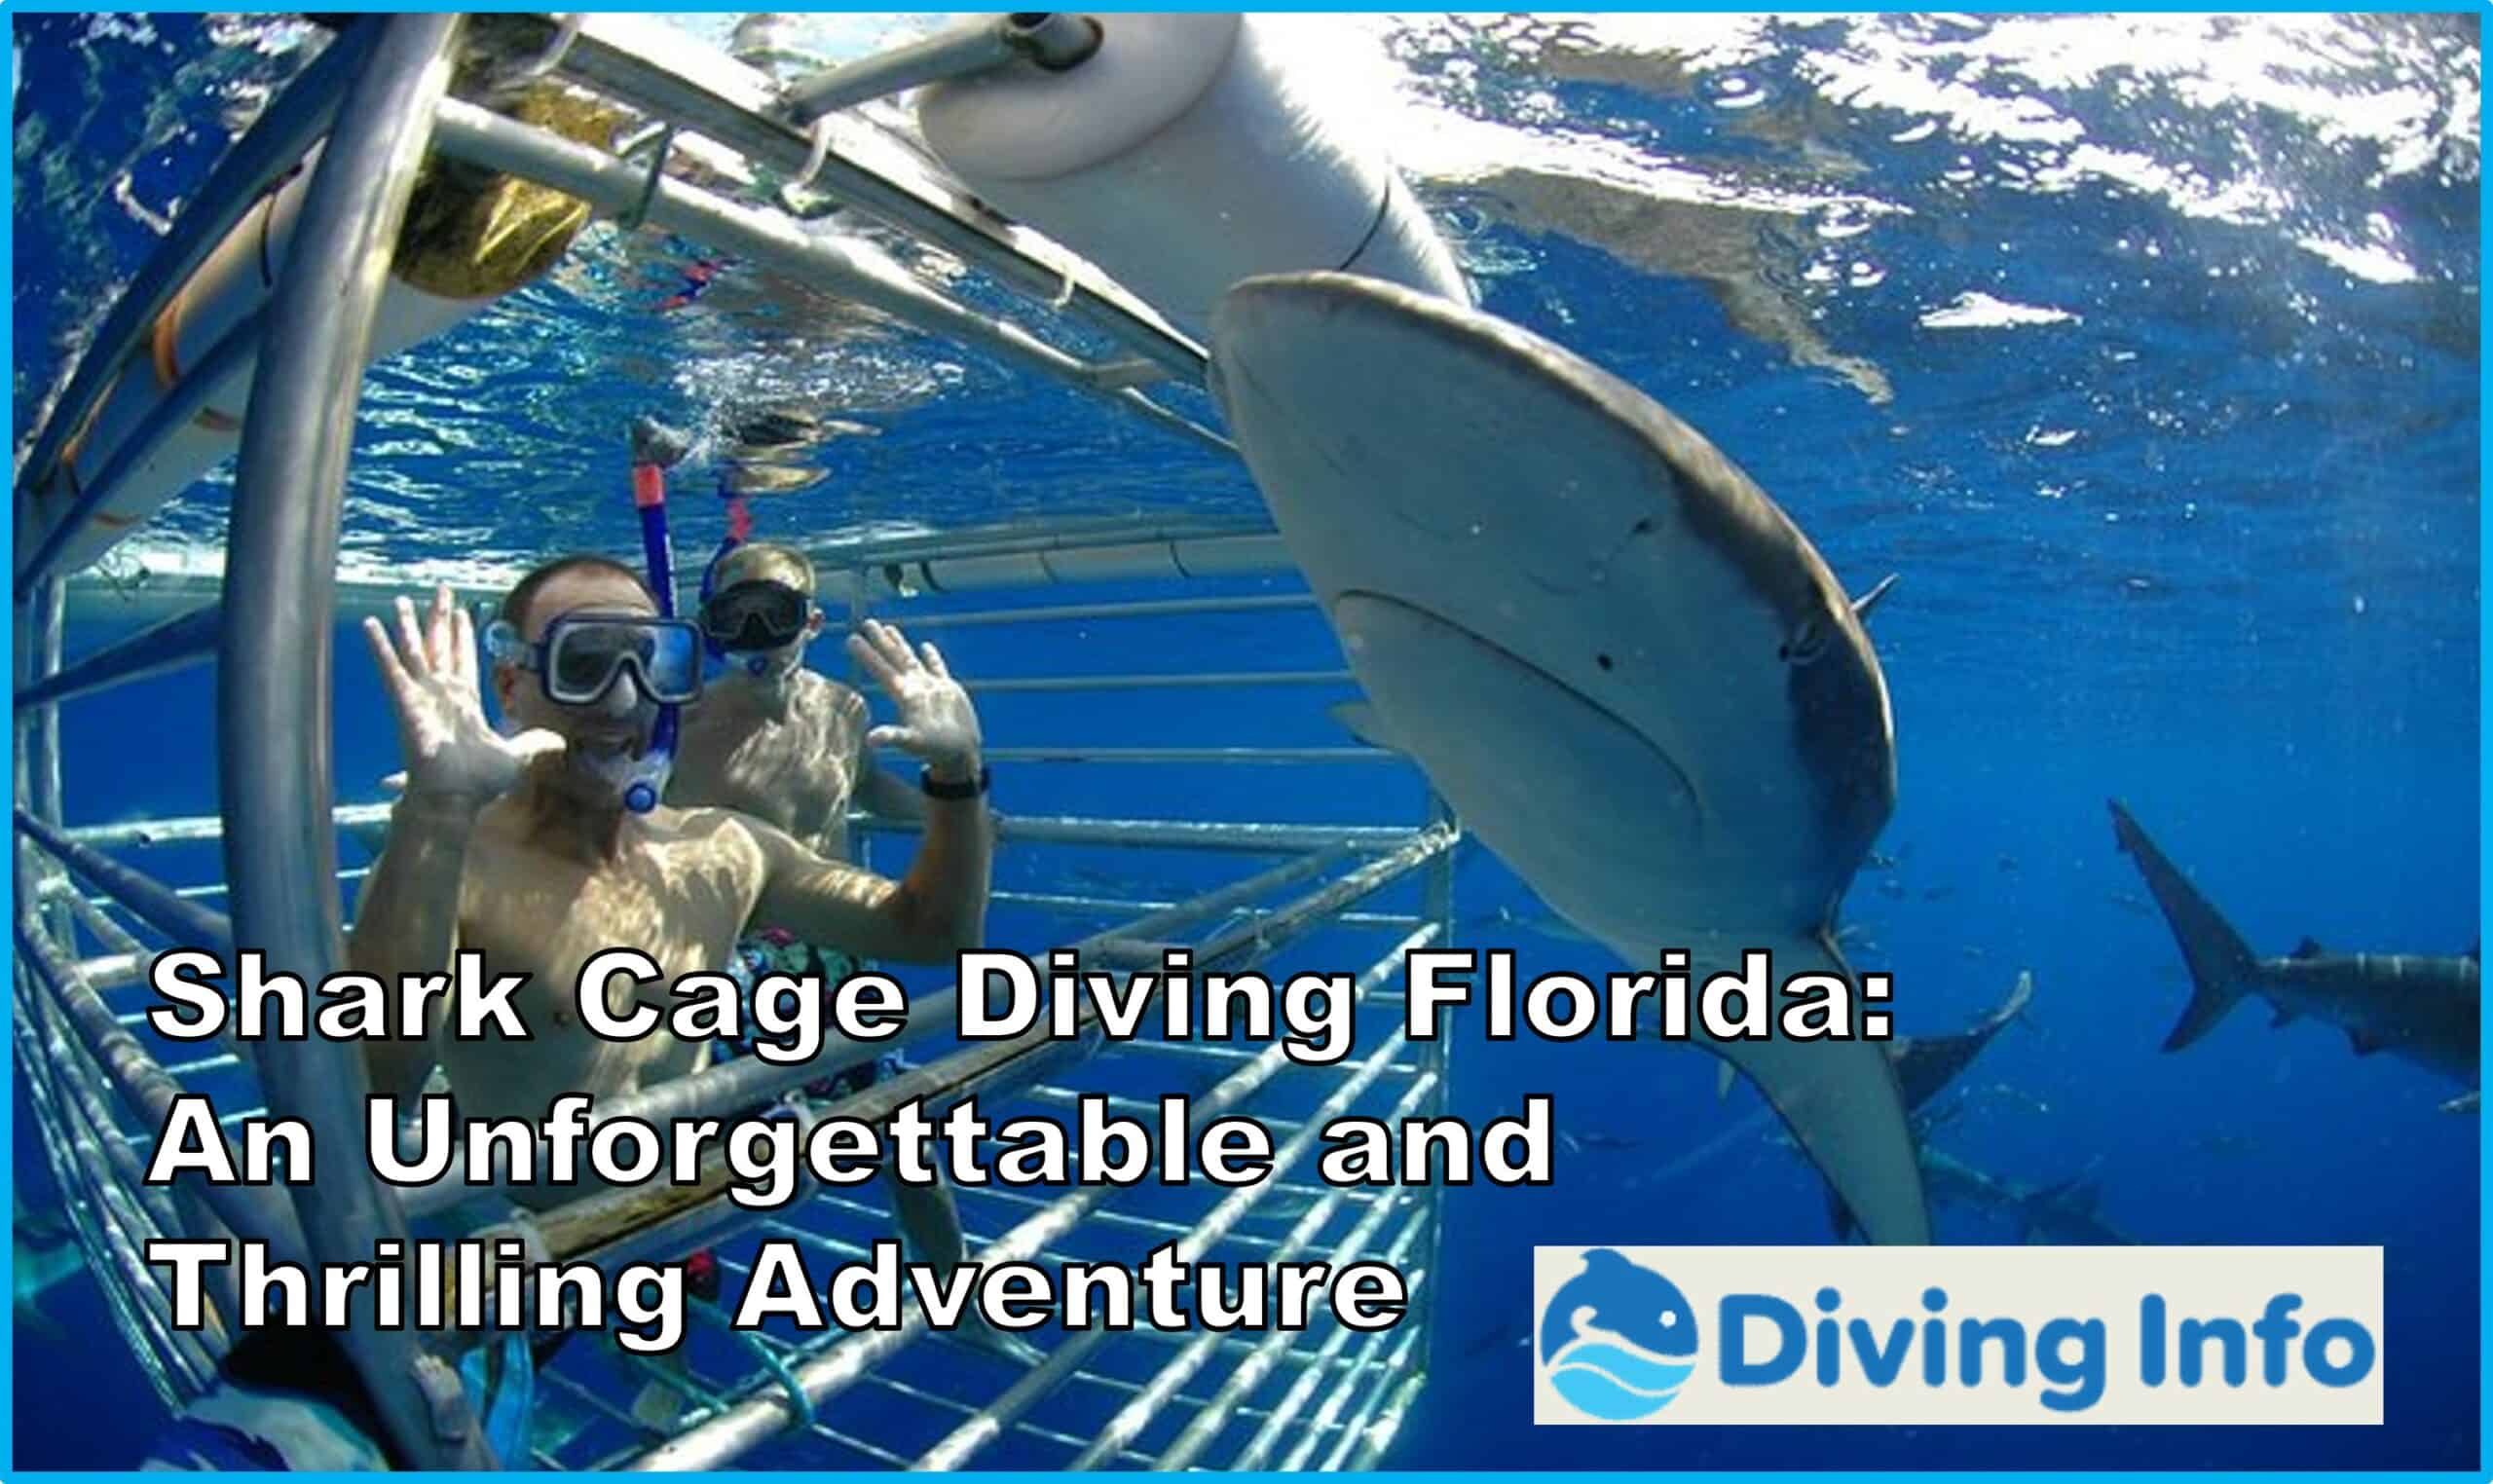 Shark Cage Diving Florida An Unforgettable and Thrilling Adventure